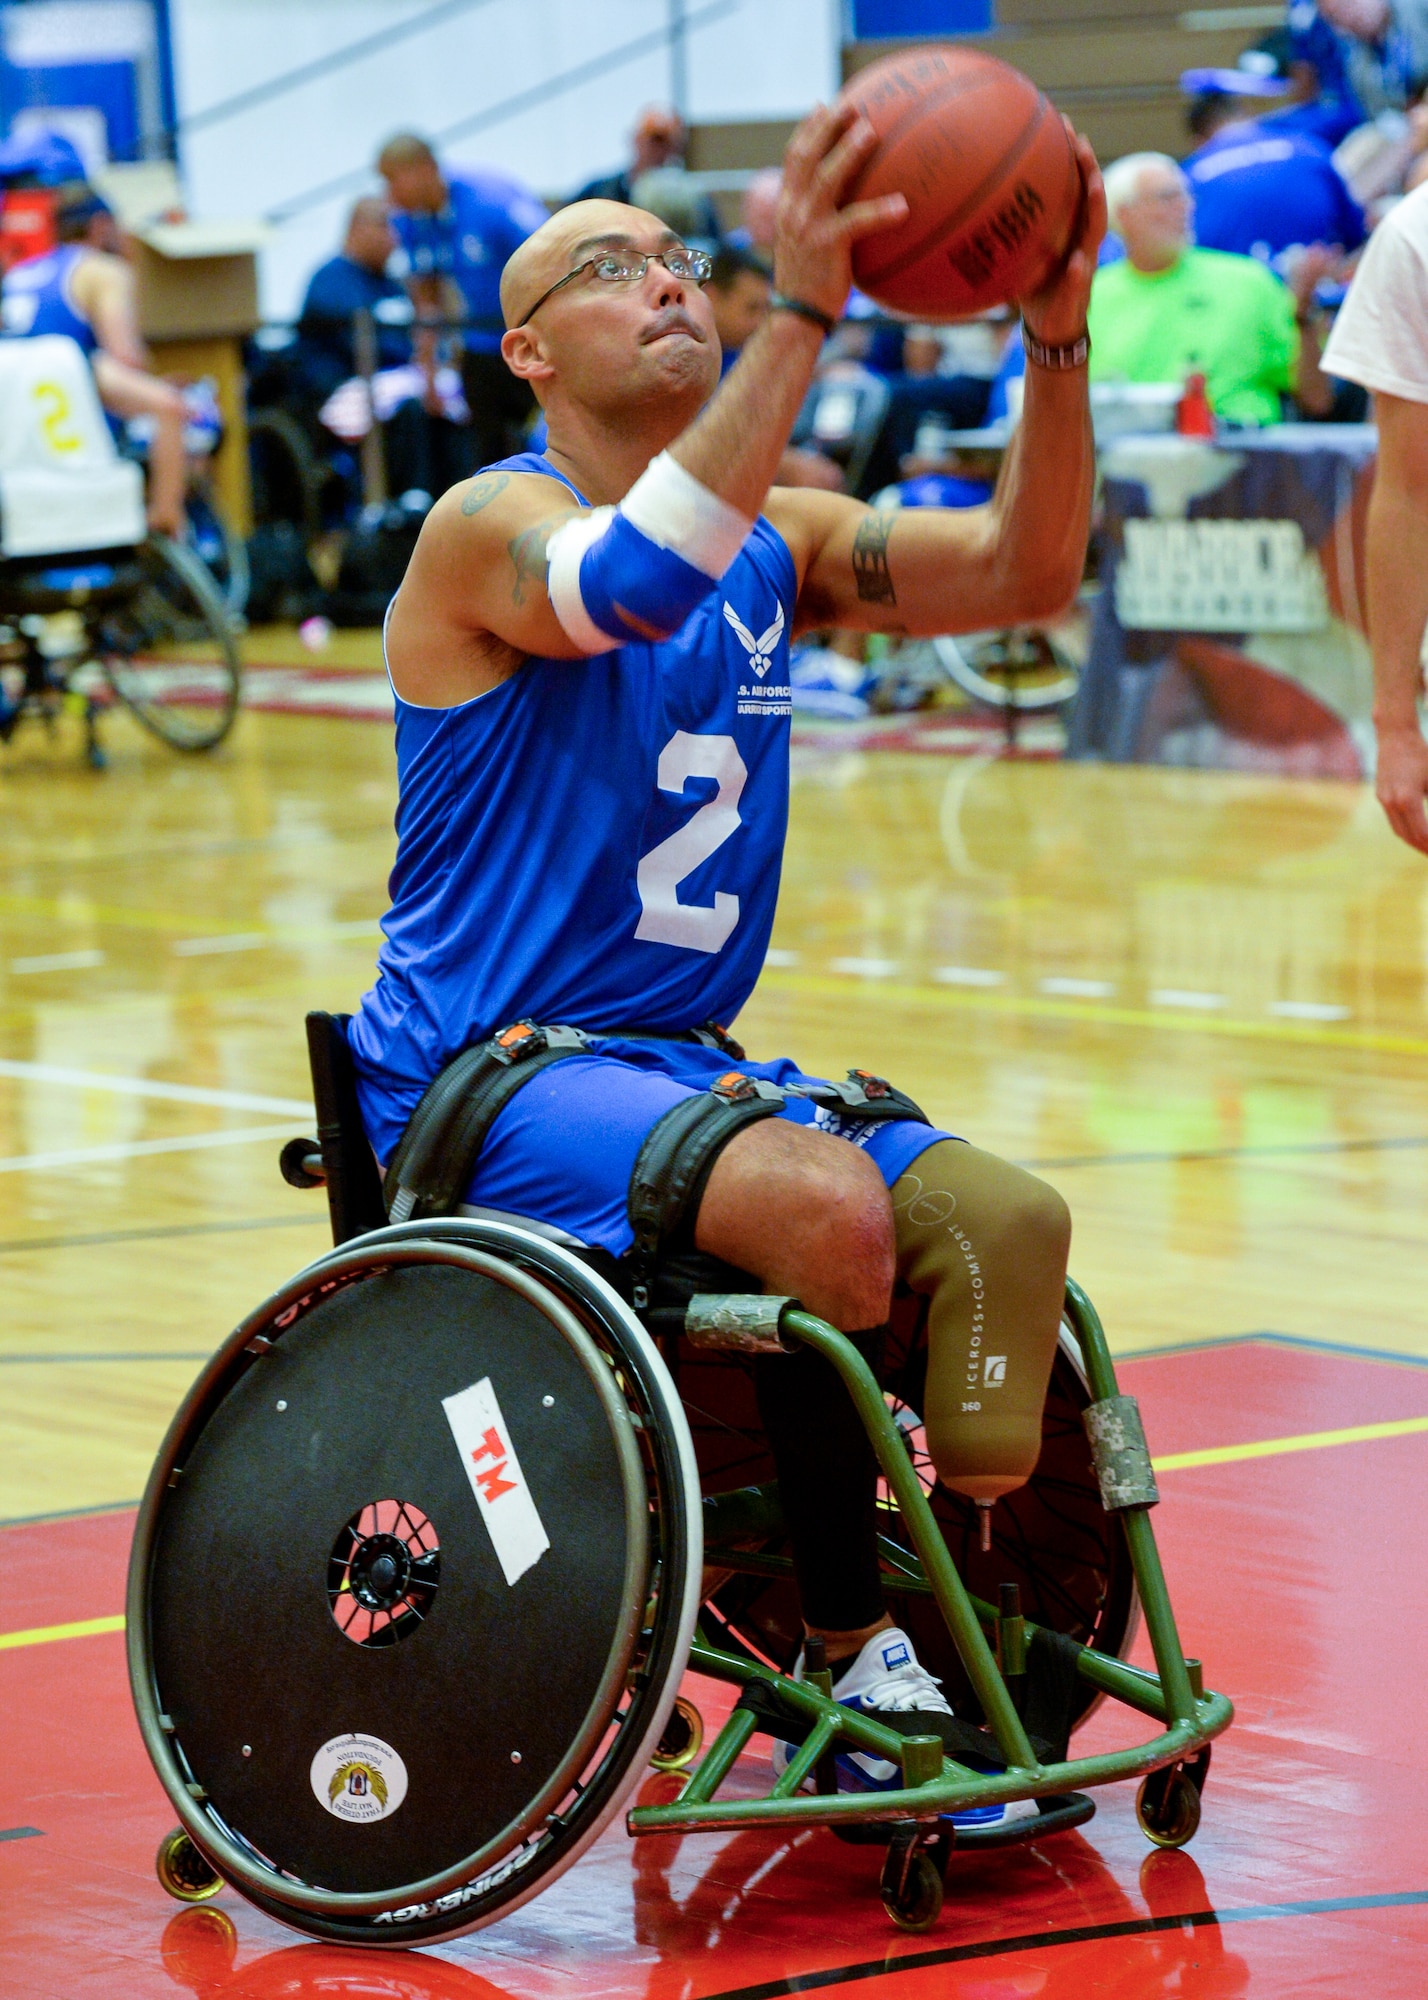 Master Sgt. Christopher Aguilera warms up before a game against Navy in the first wheelchair basketball game of the 2014 Warrior Games Sept. 29, 2014, at the U.S. Olympic Training Center in Colorado Springs, Colo. The Air Force team lost 38-19 and will play the U.S. Special Operations Command in the next round. (U.S Air Force photo/Staff Sgt. Devon Suits) 
